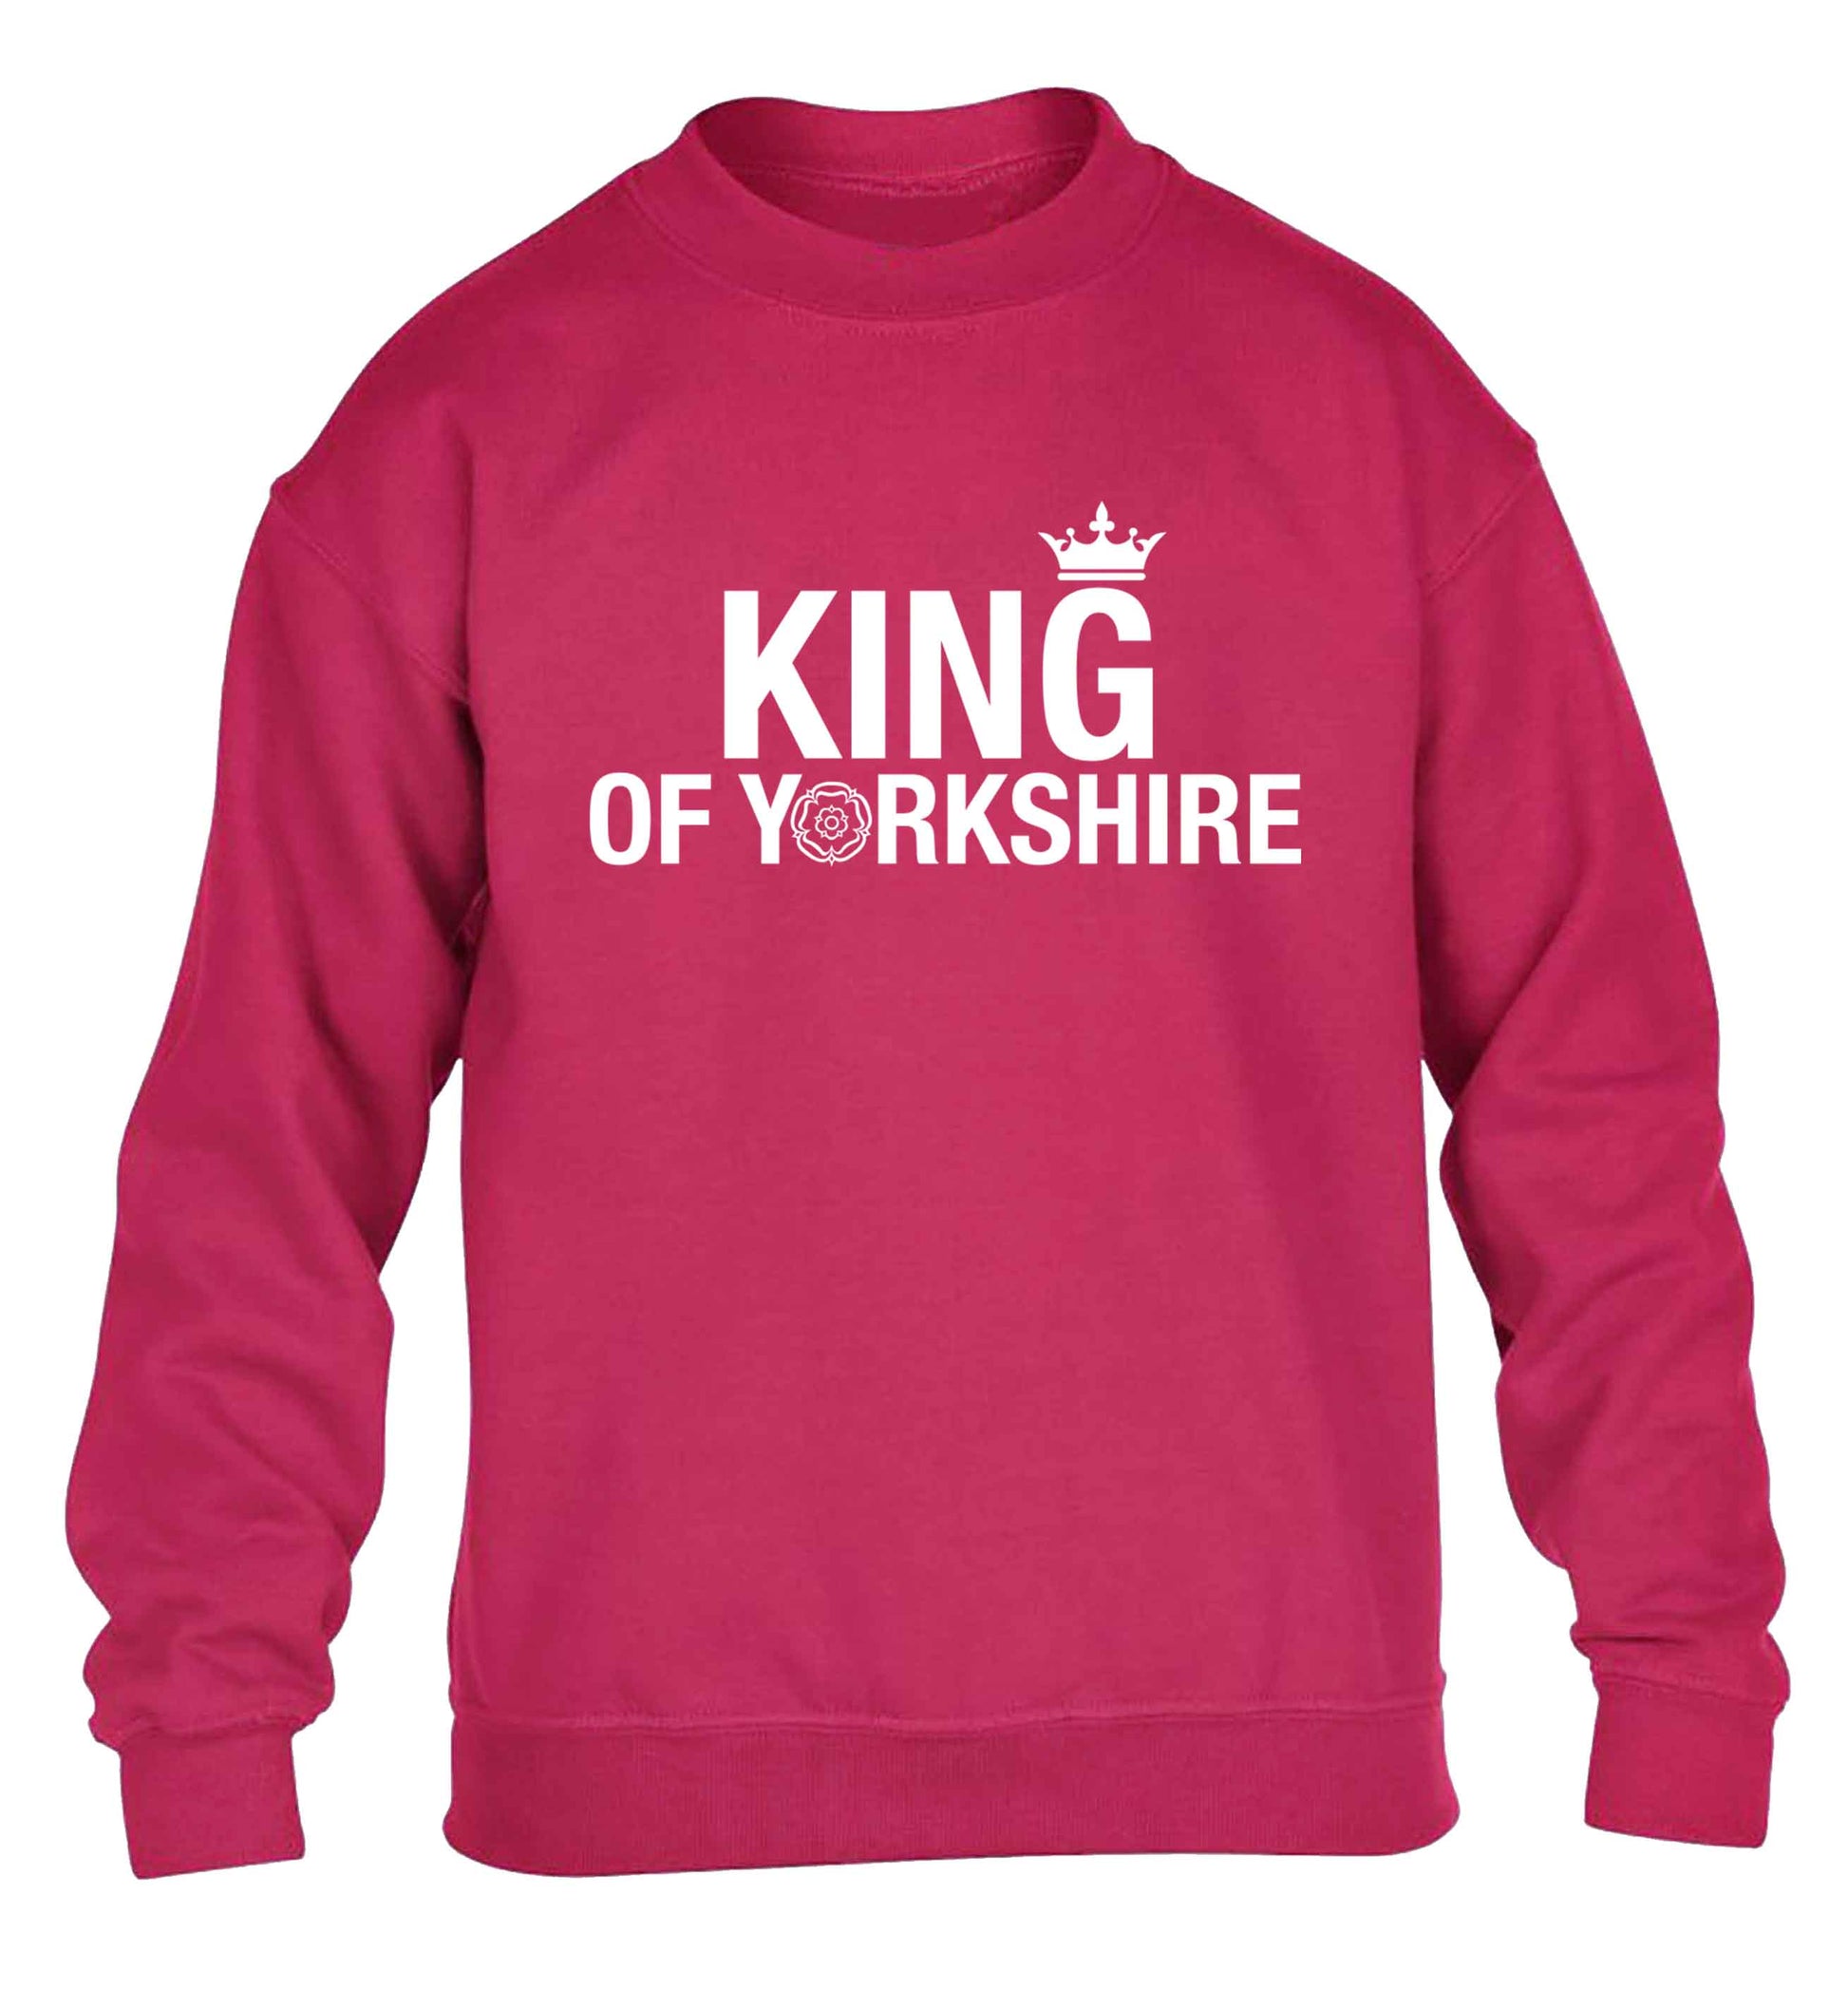 King of Yorkshire children's pink sweater 12-13 Years